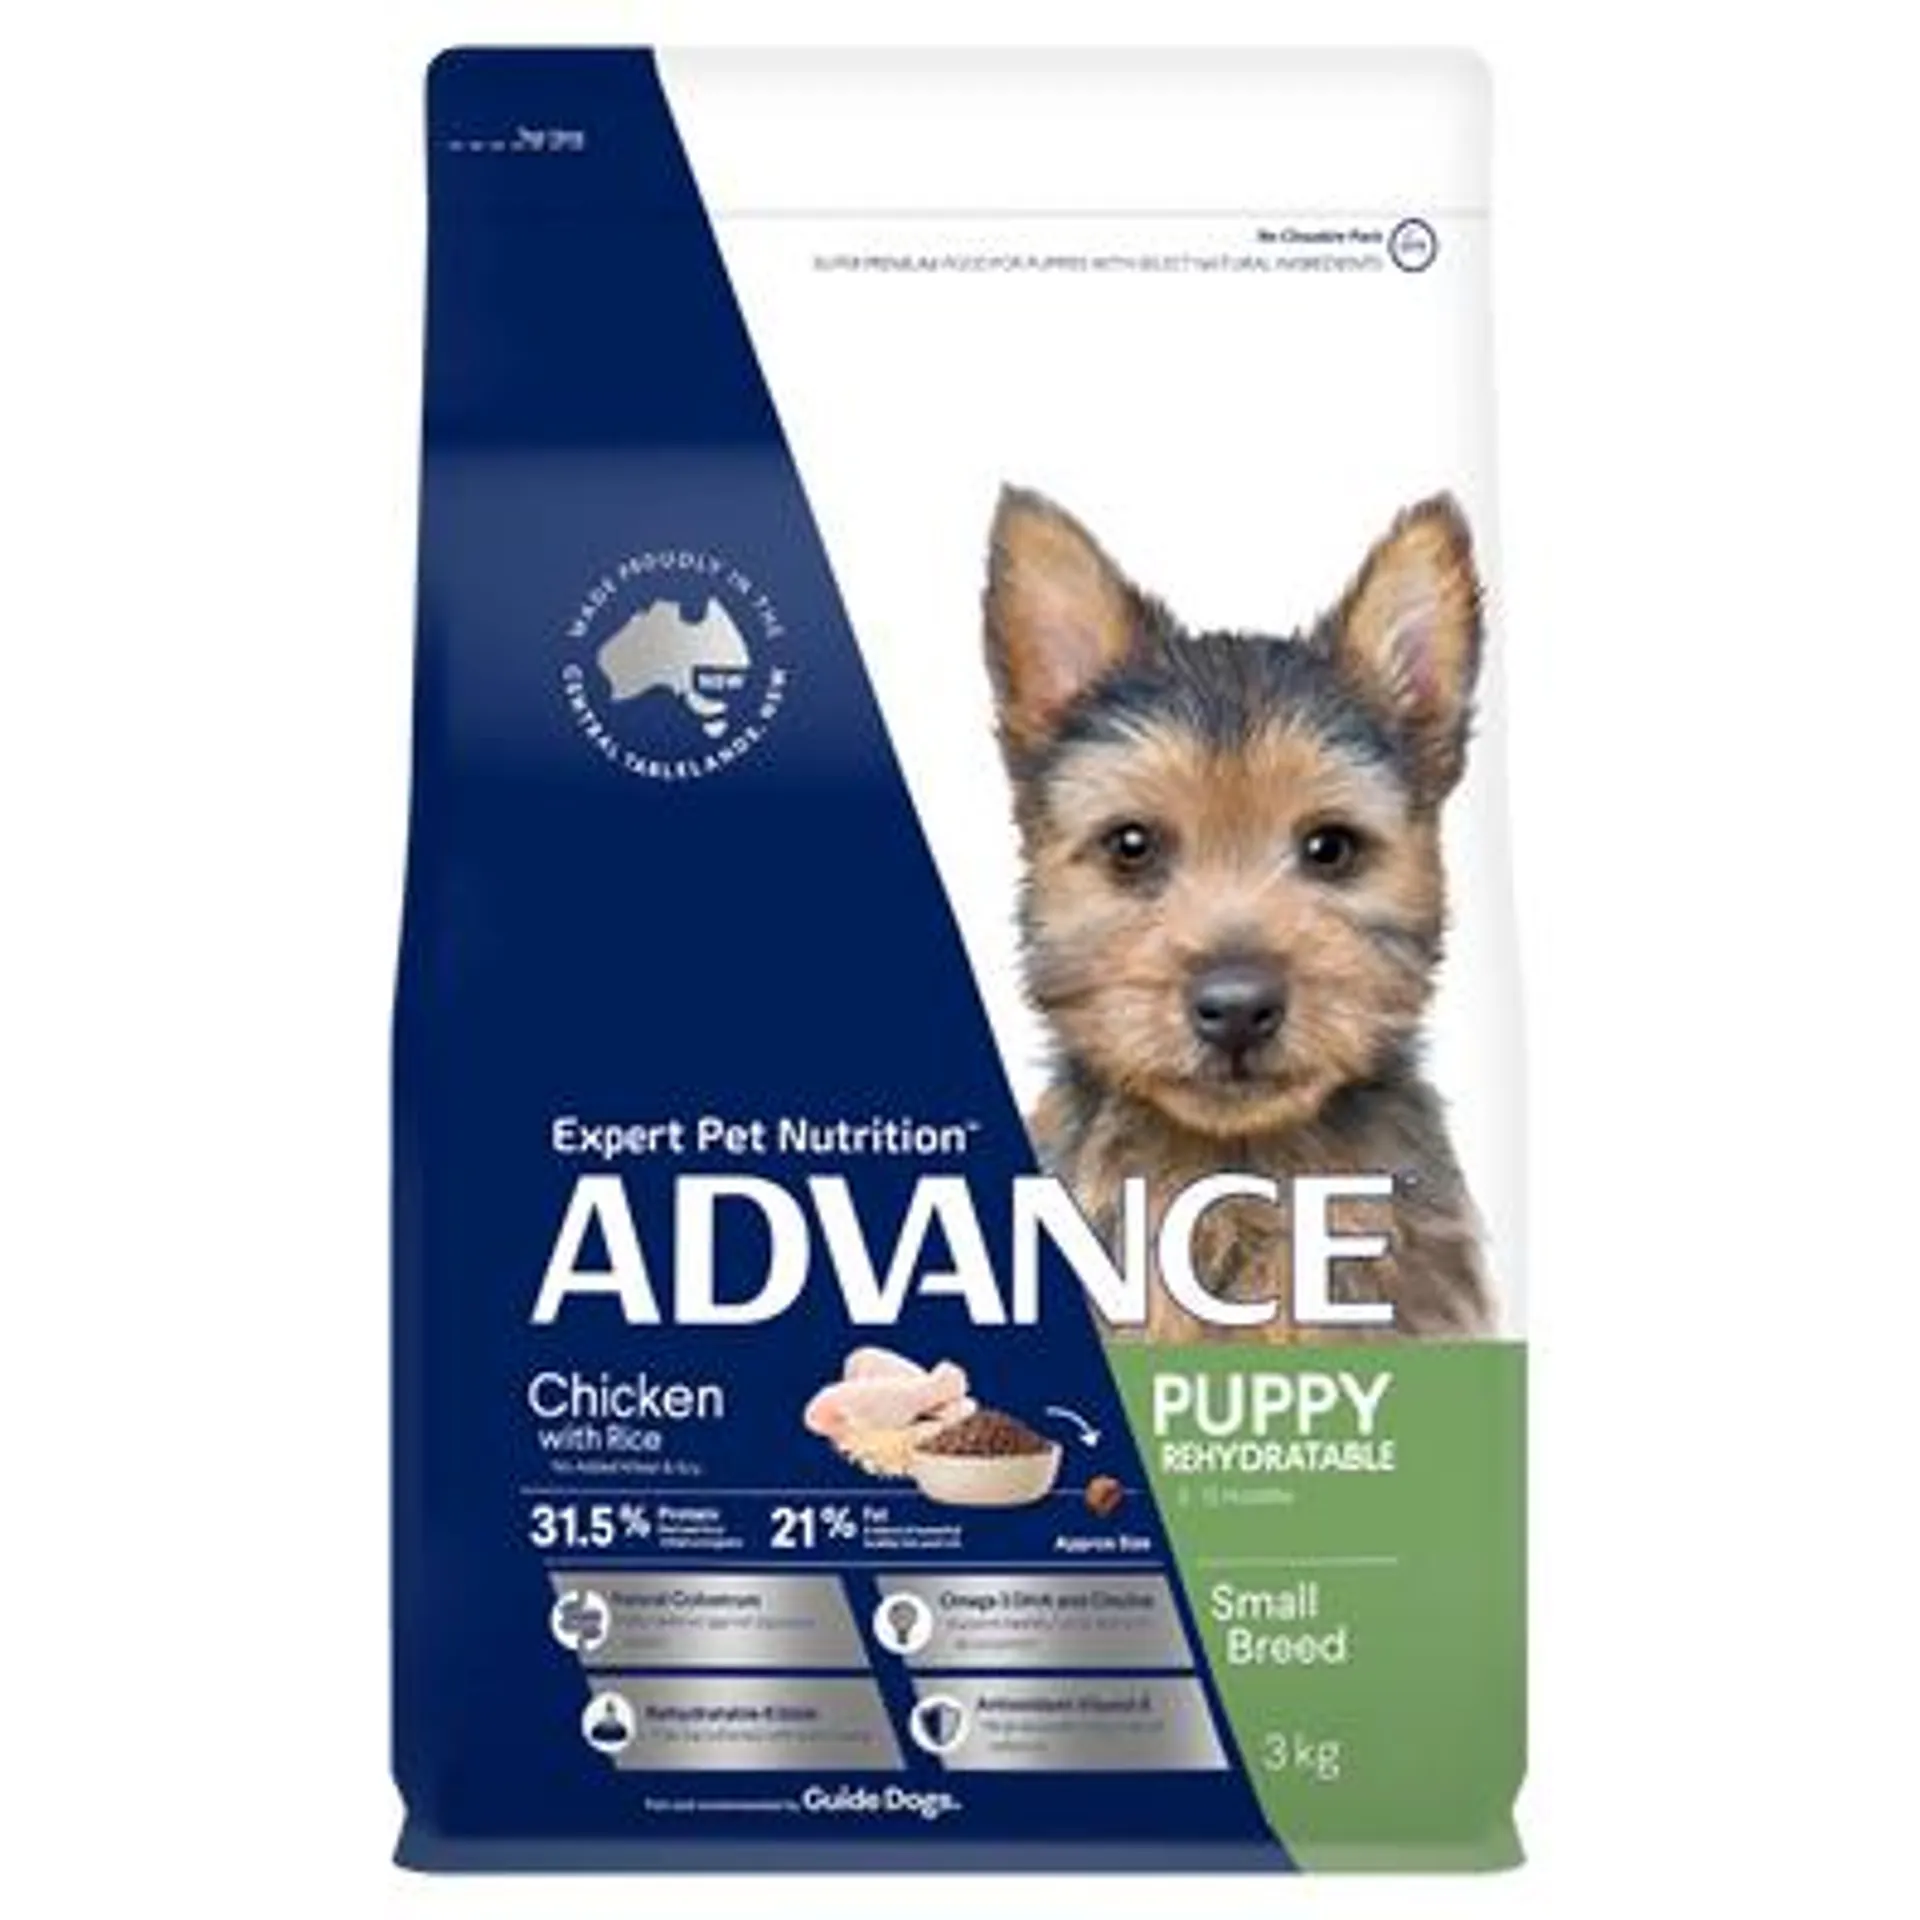 ADVANCE Puppy Rehydratable Small Breed Dry Dog Food Chicken